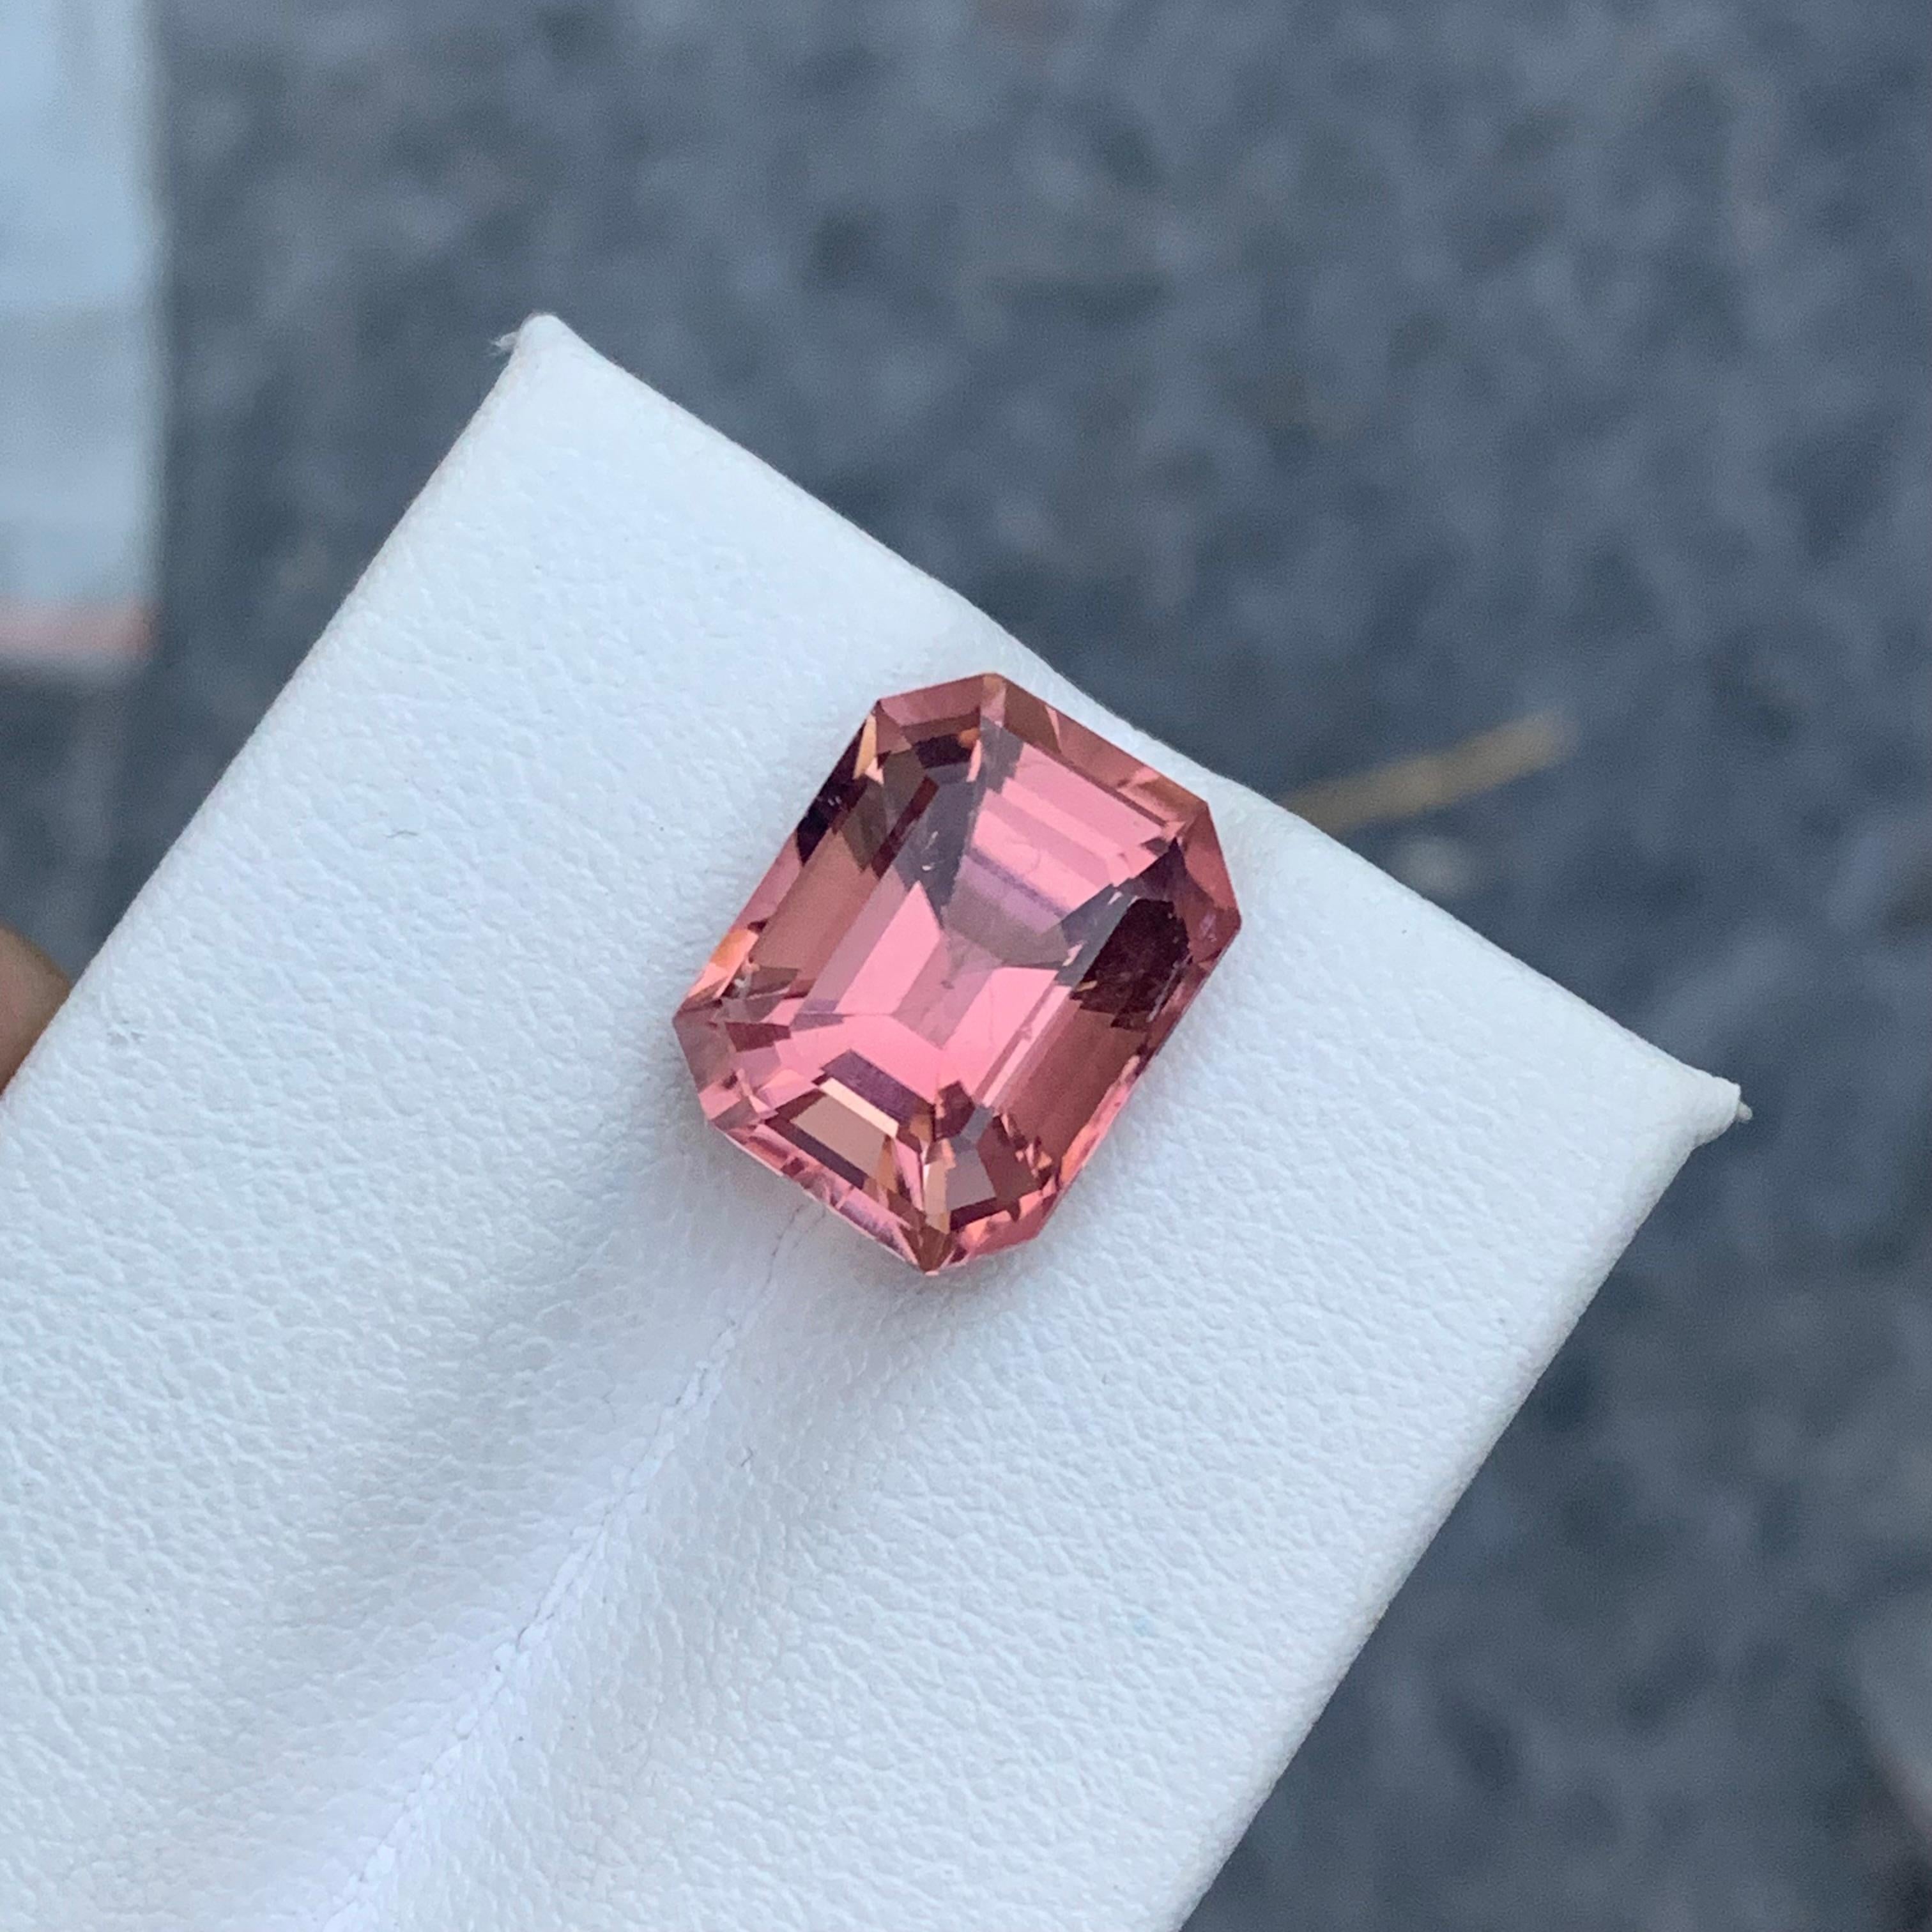 Faceted Tourmaline
Weight: 6.70 Carats
Dimension: 12.5x9.8x7.7 Mm
Origin: Afghanistan
Color: Pink
Shape: Long Asscher Irregular 
Clarity: SI
Certificate: On Demand

With a rating between 7 and 7.5 on the Mohs scale of mineral hardness, tourmaline